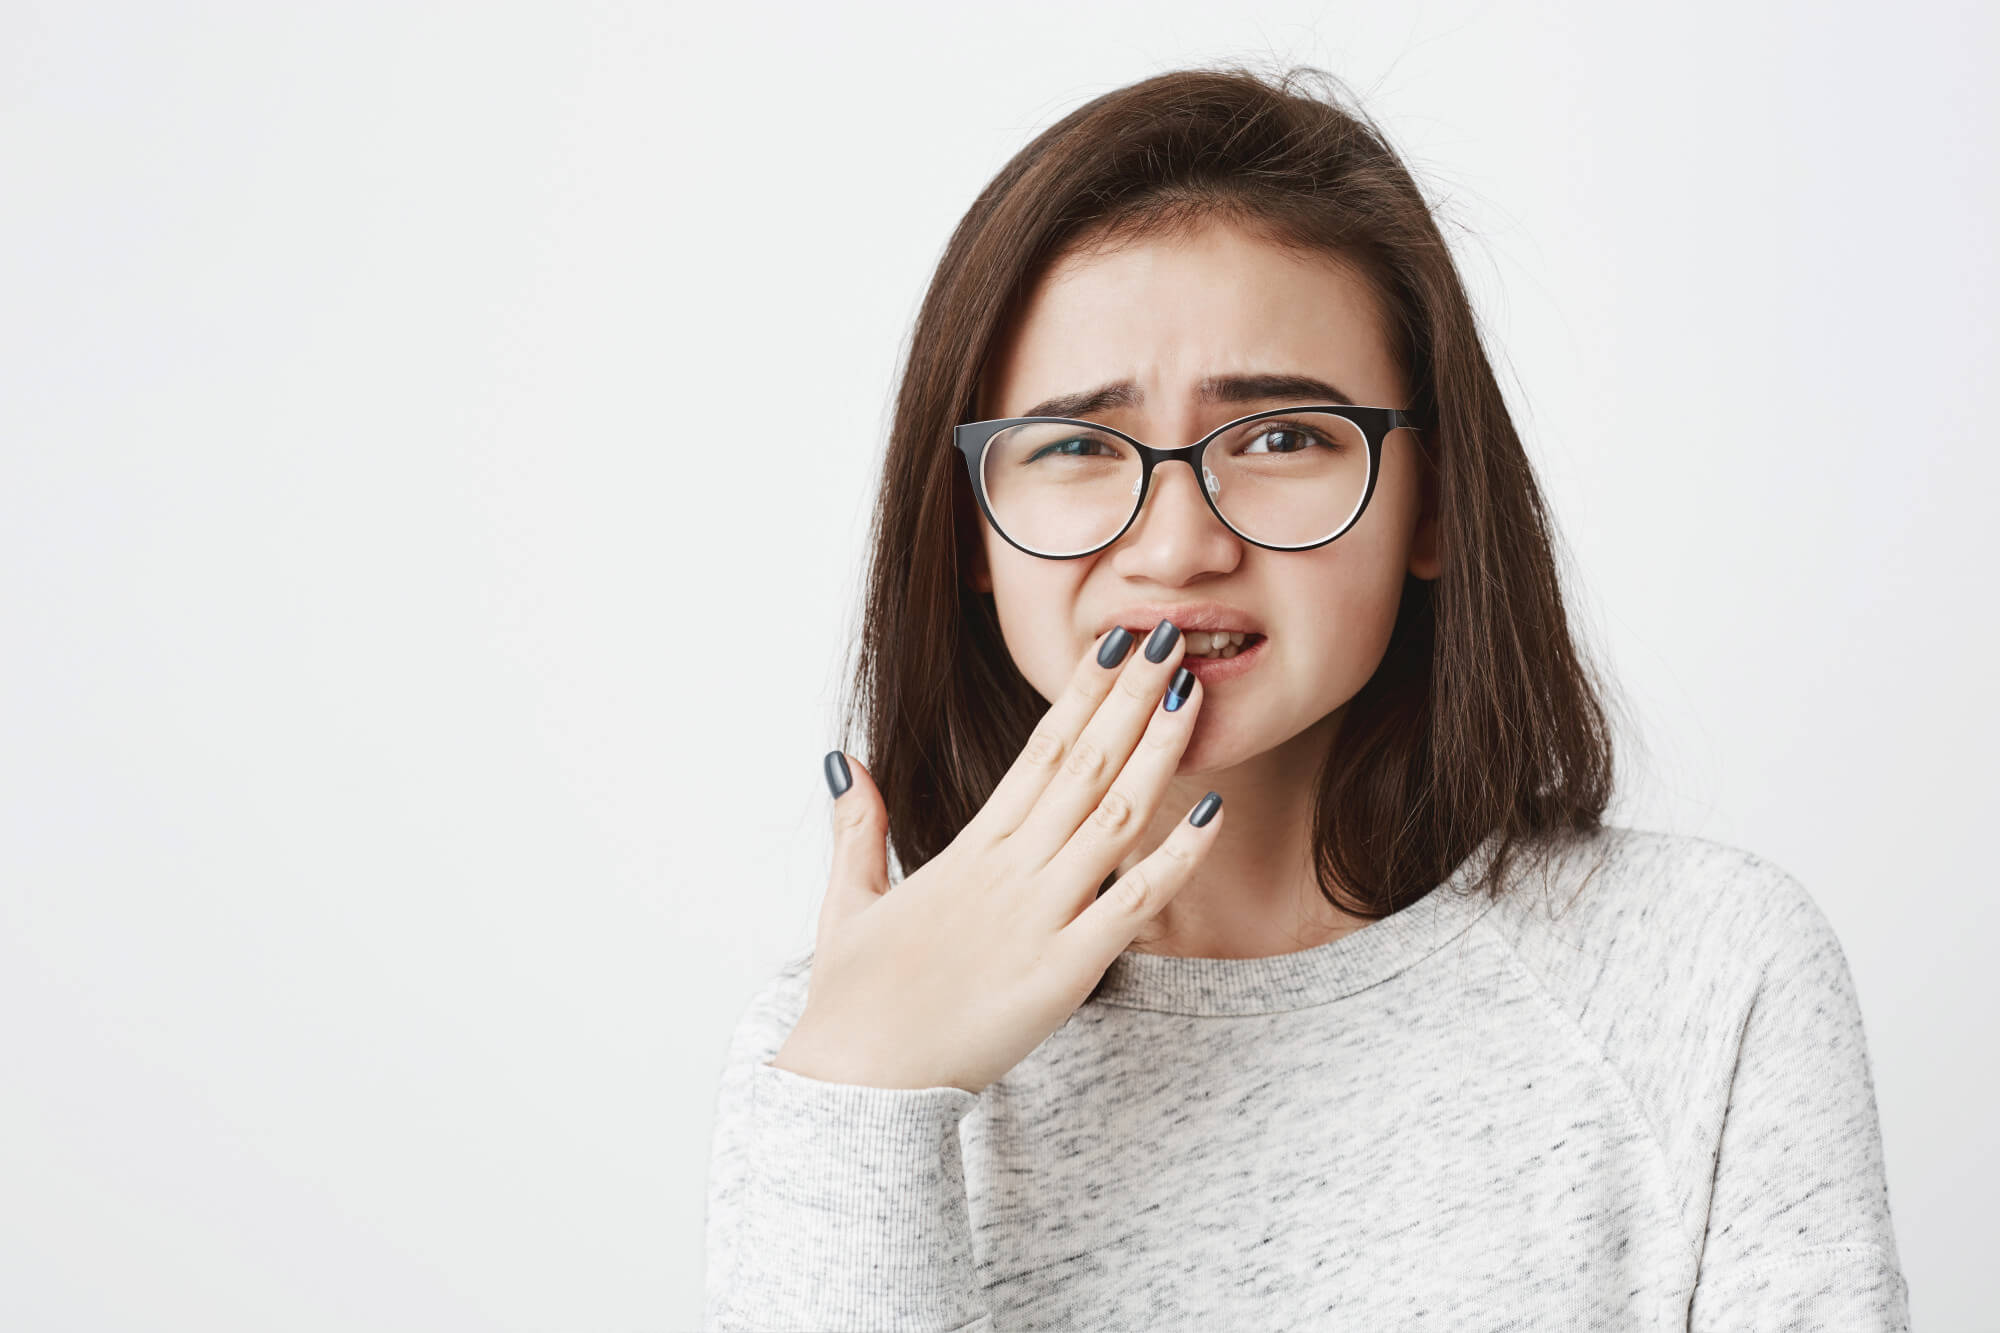 Teeth Sensitivity: Causes and How to Prevent It